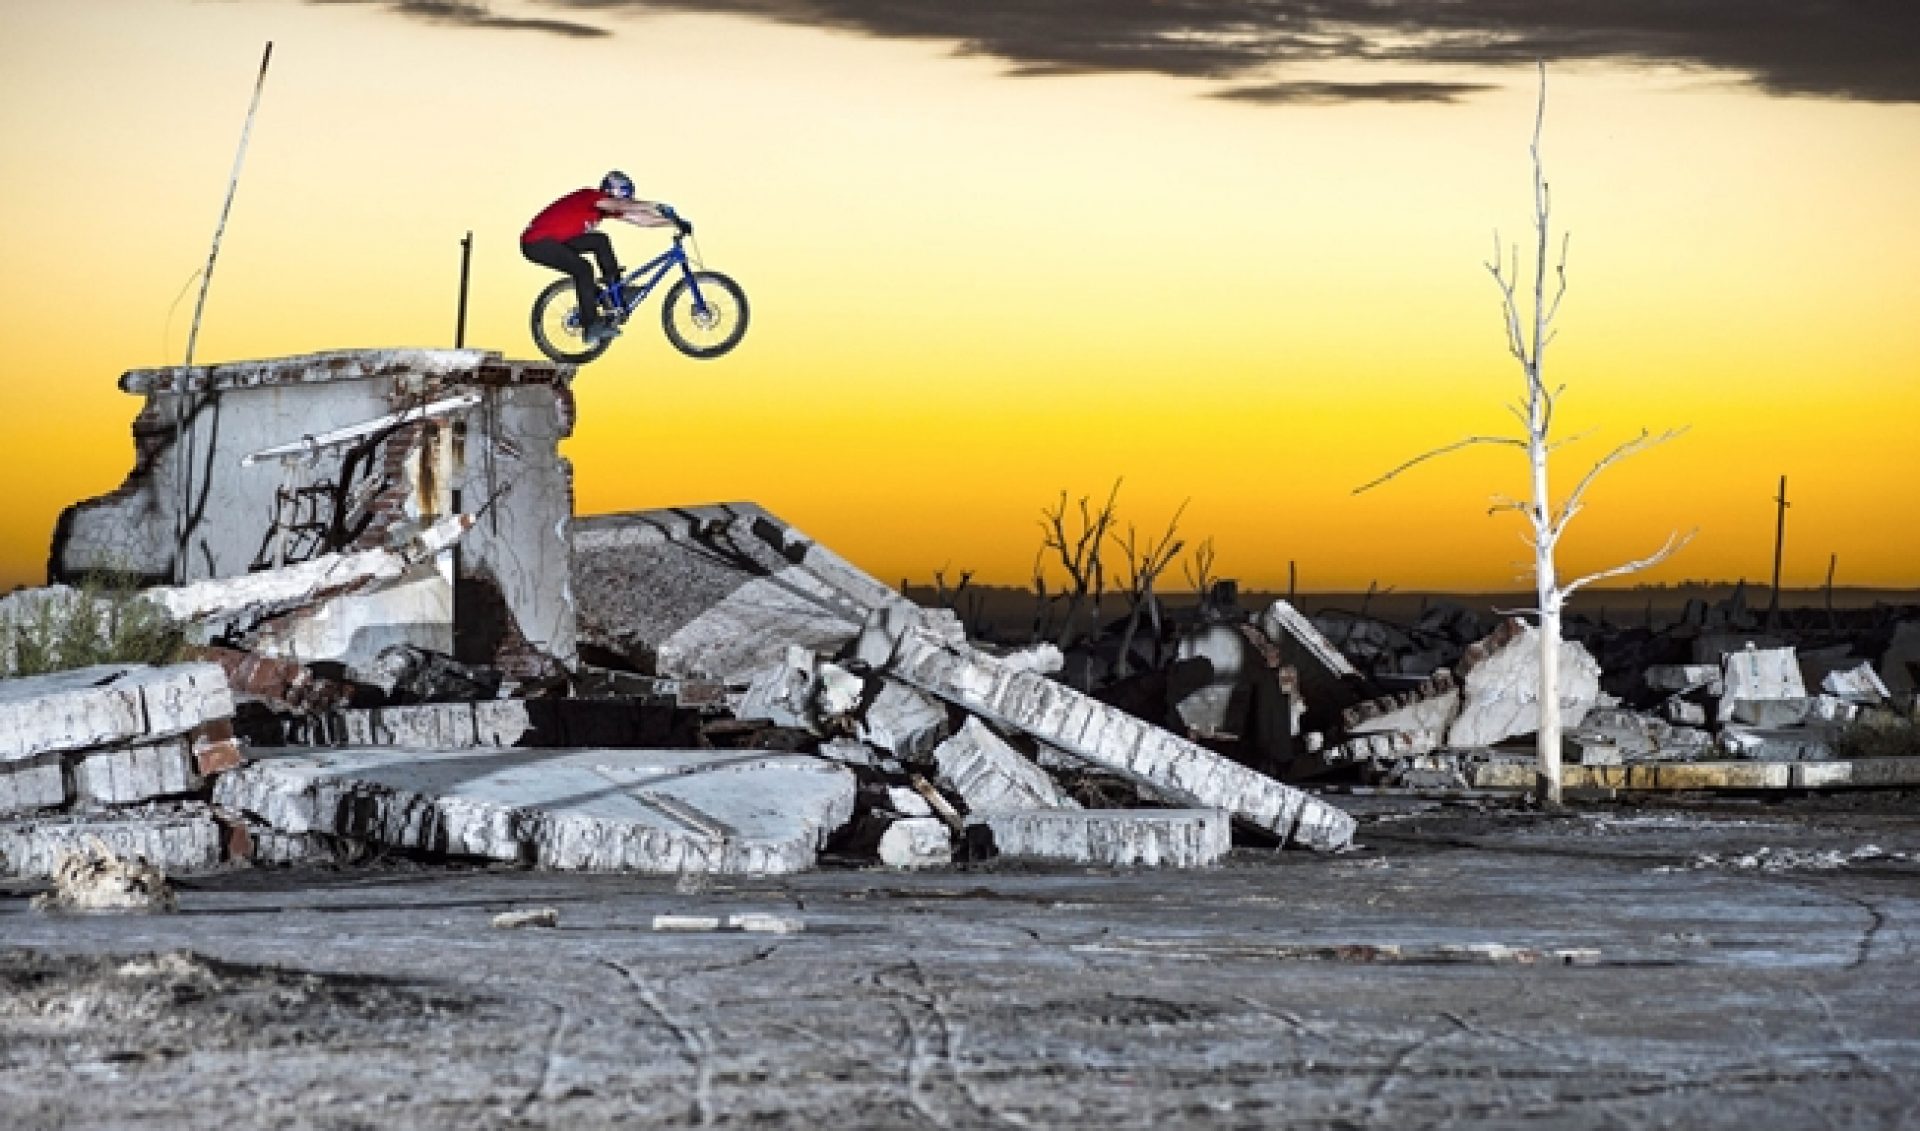 Danny MacAskill Bikes Through Abandoned Town In Latest Red Bull Video